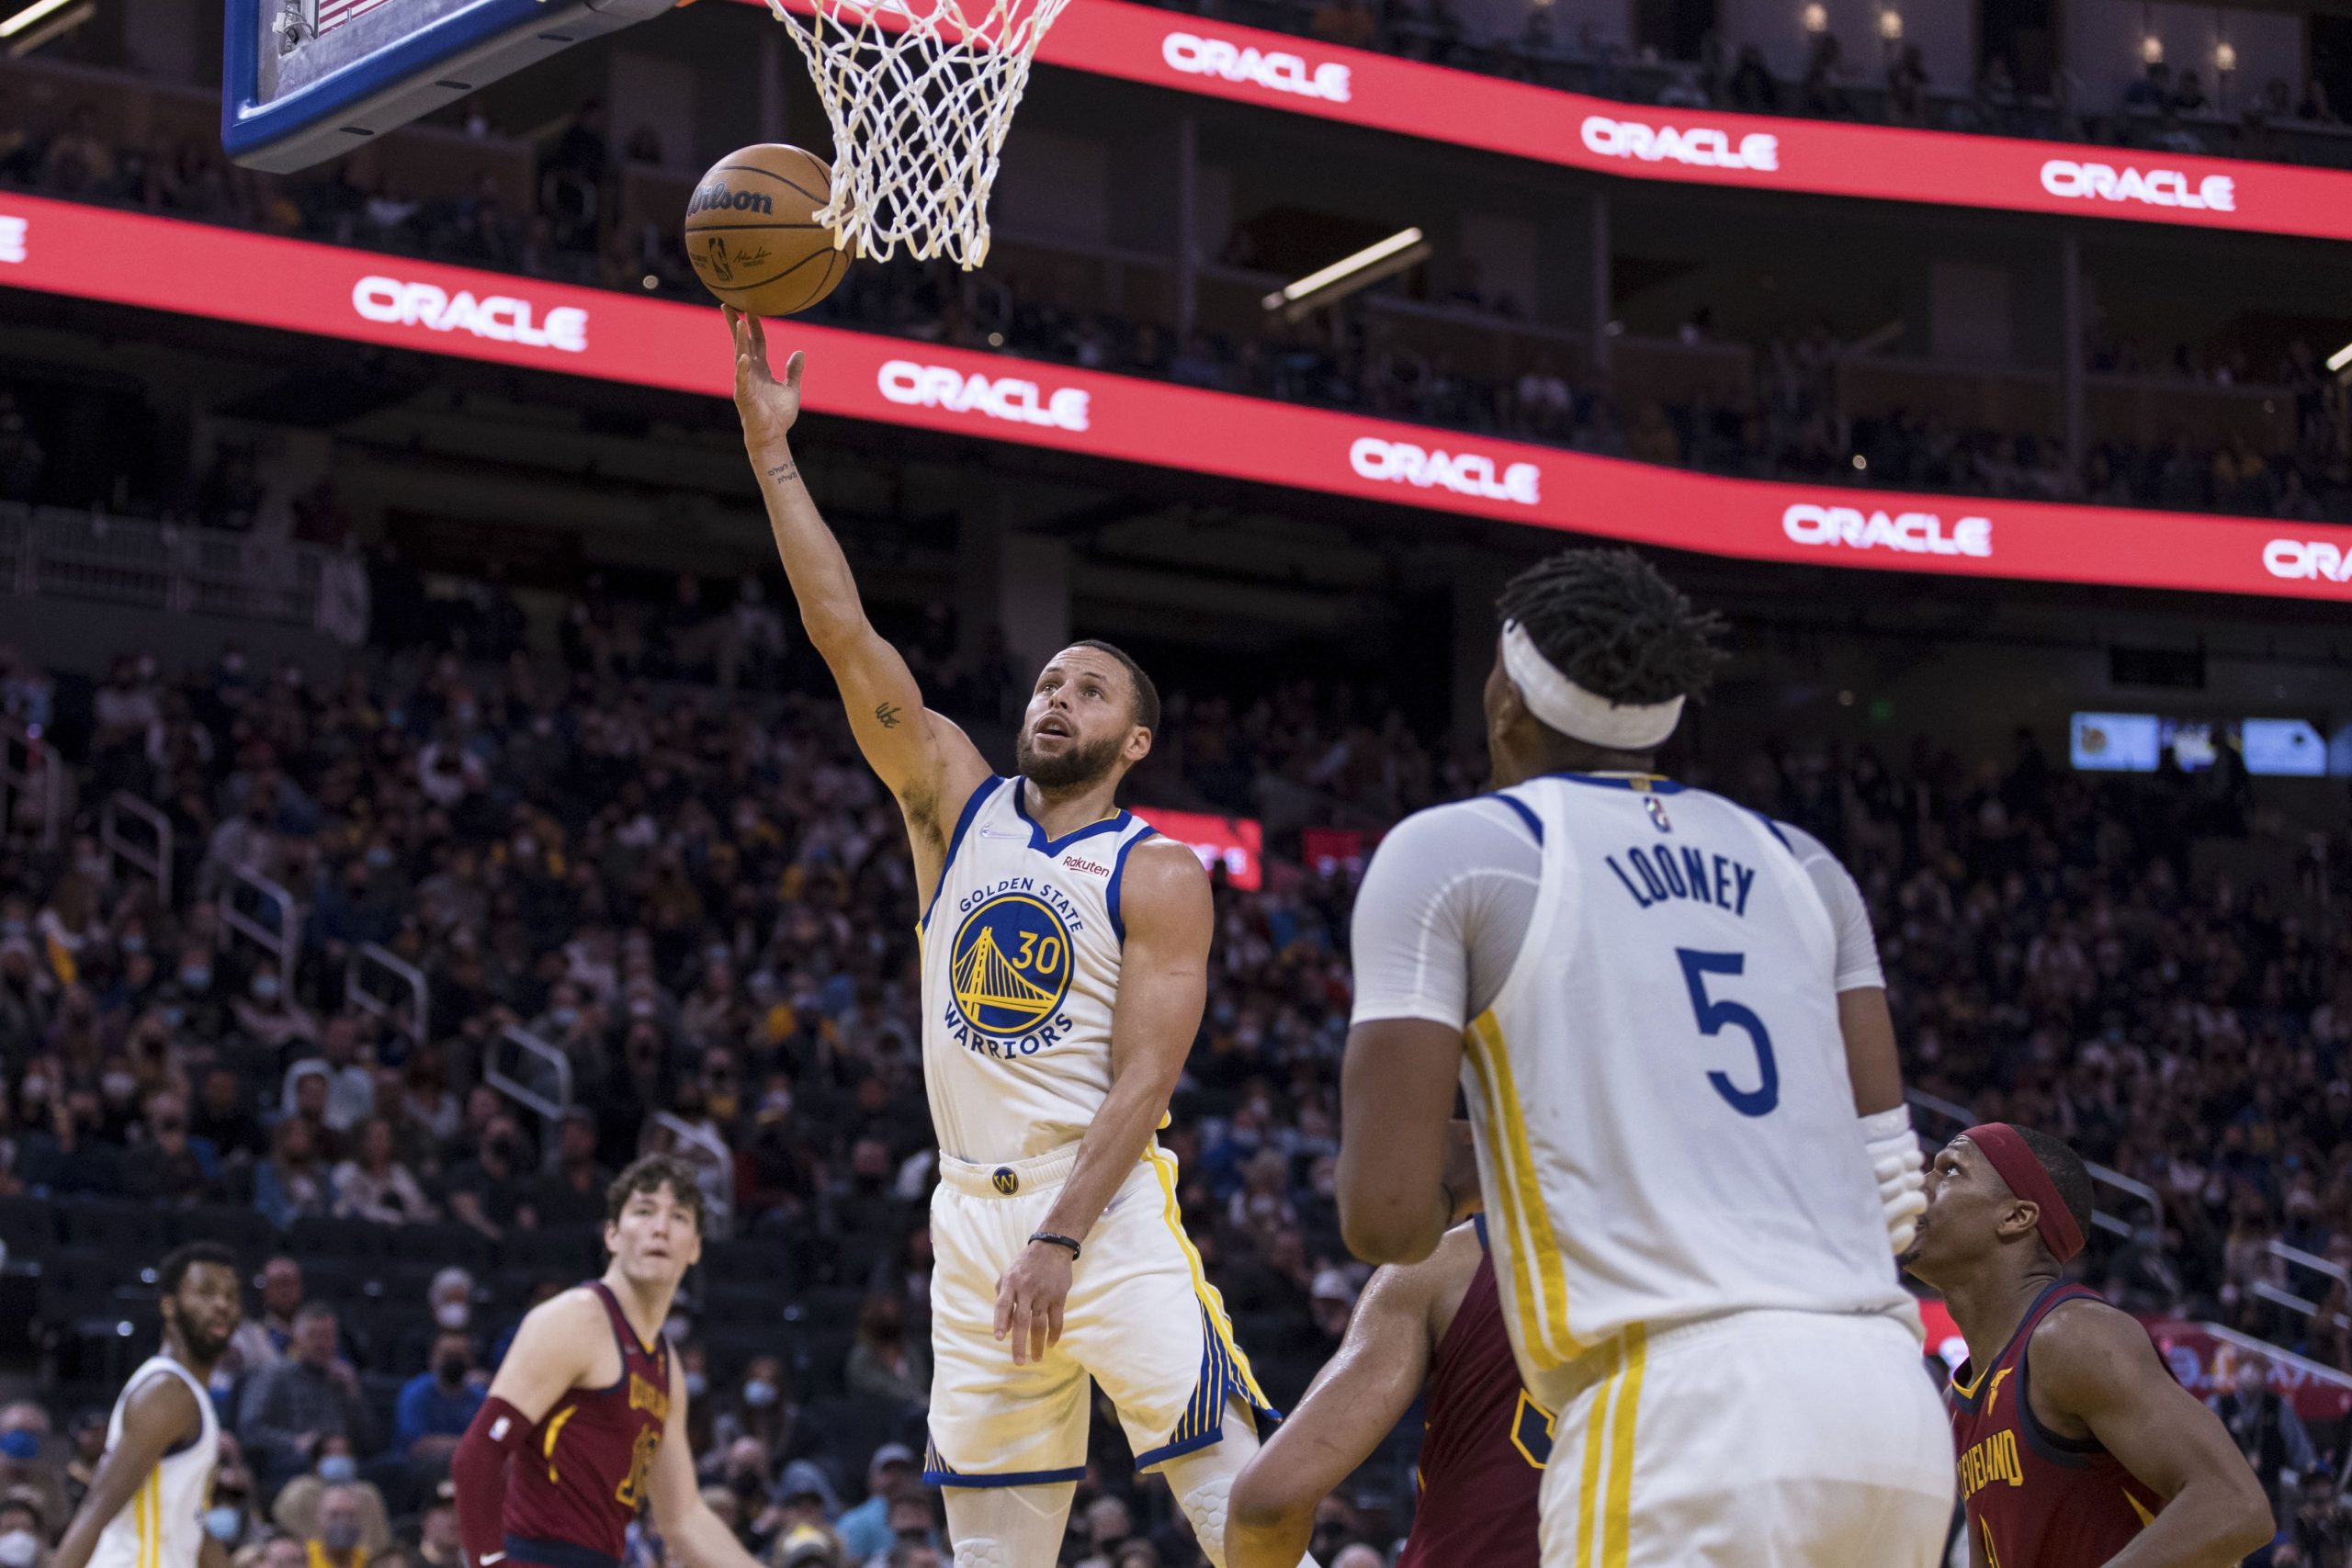 Golden State Warriors guard Stephen Curry (30) lays up up the ball against the Cleveland Cavaliers during the second half of an NBA basketball game in San Francisco, Sunday, Jan. 9, 2022